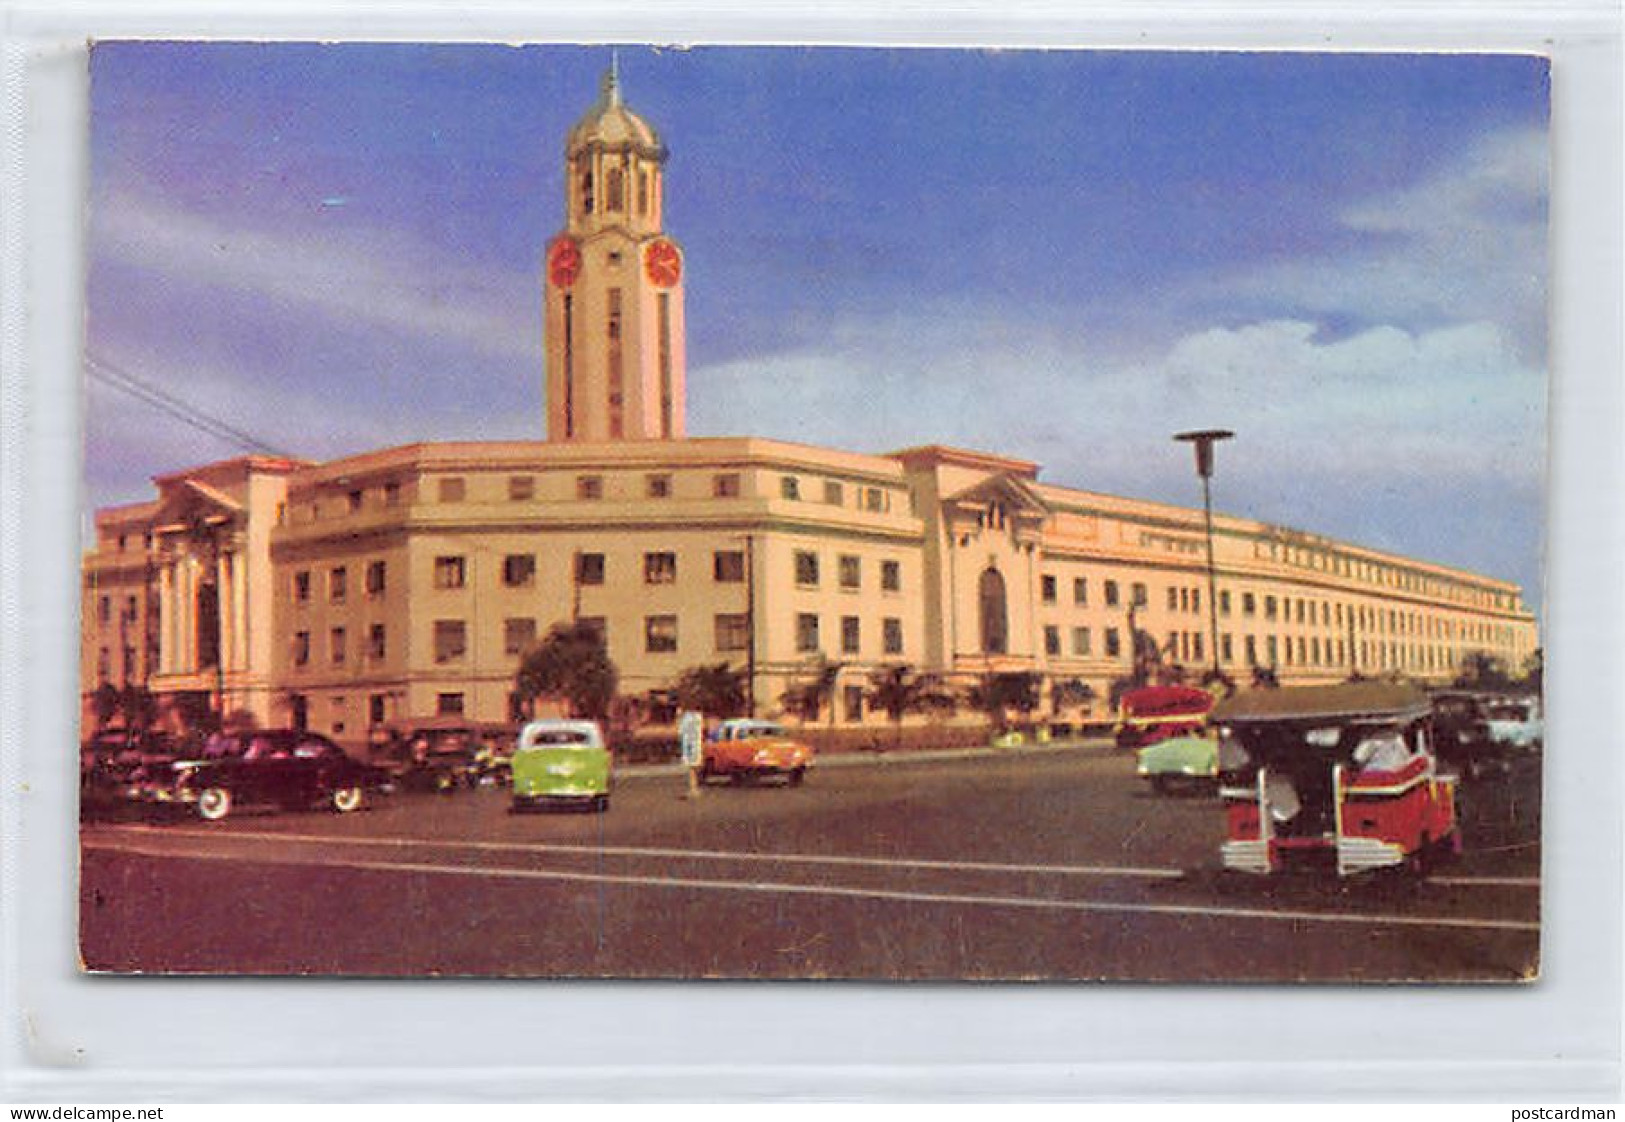 Philippines - MANILA - City Hall - Publ. Goodwill Trading Co.  - Philippines